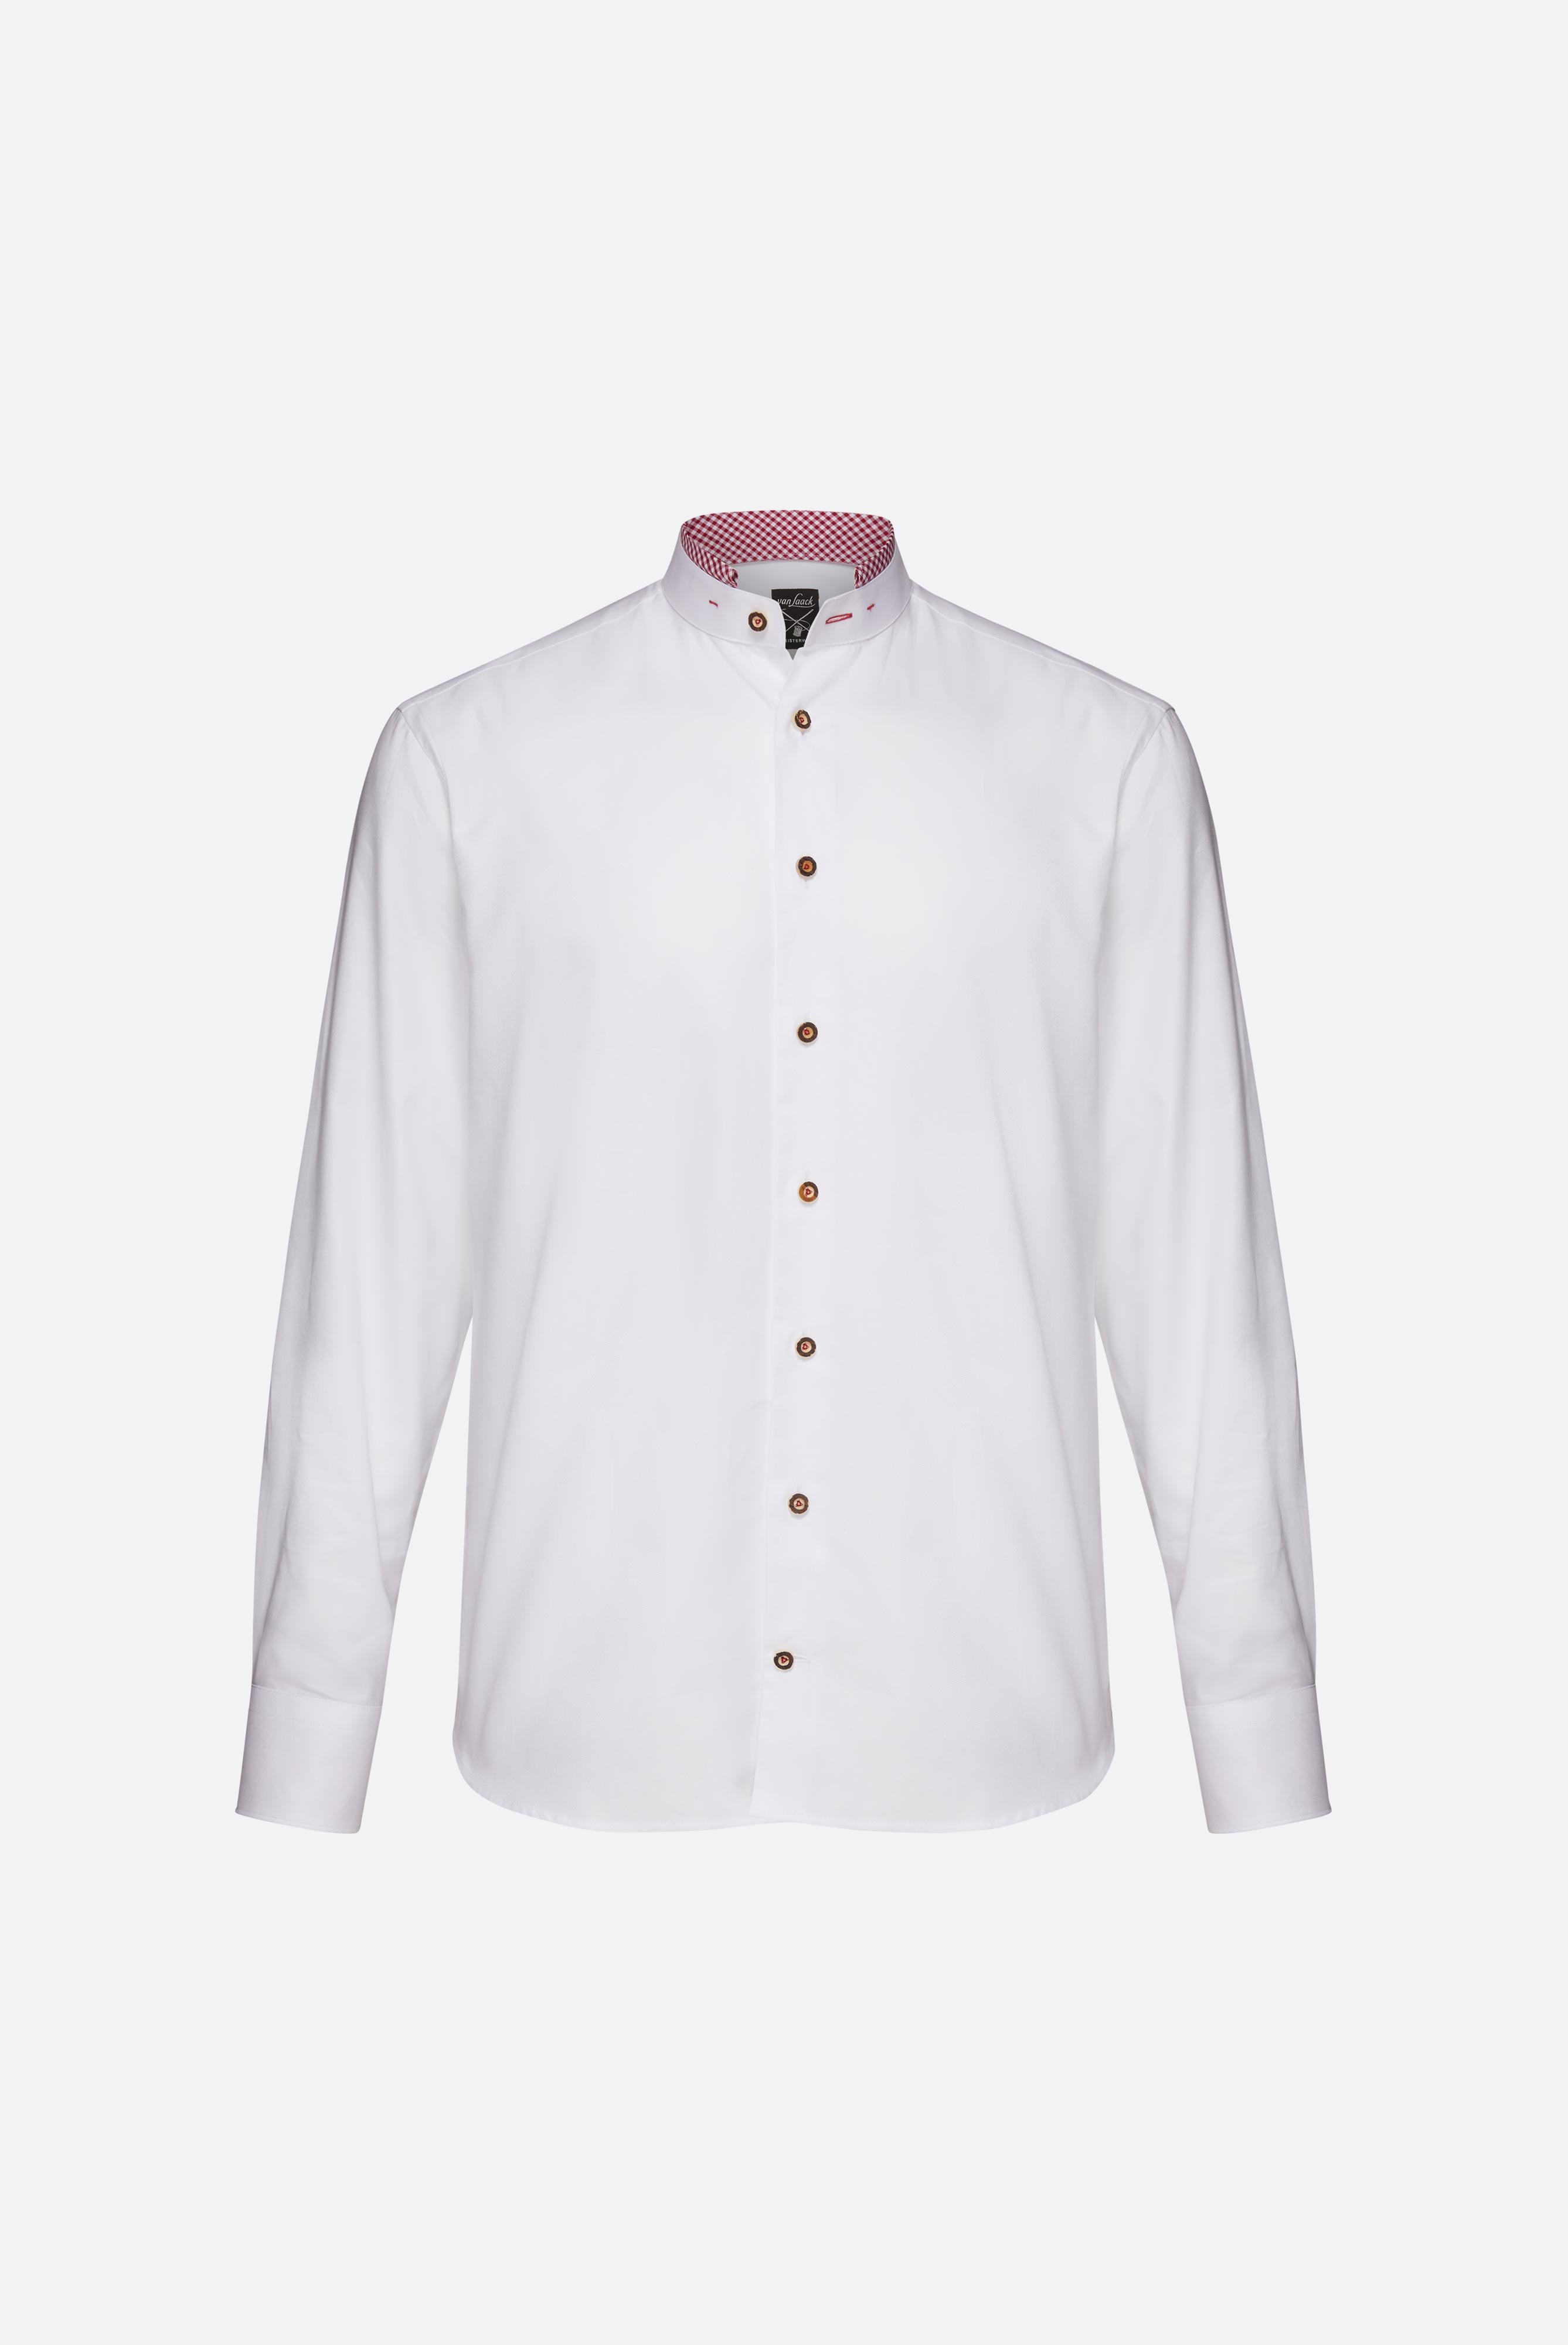 Oxford Tradtional Shirt with coloured detail